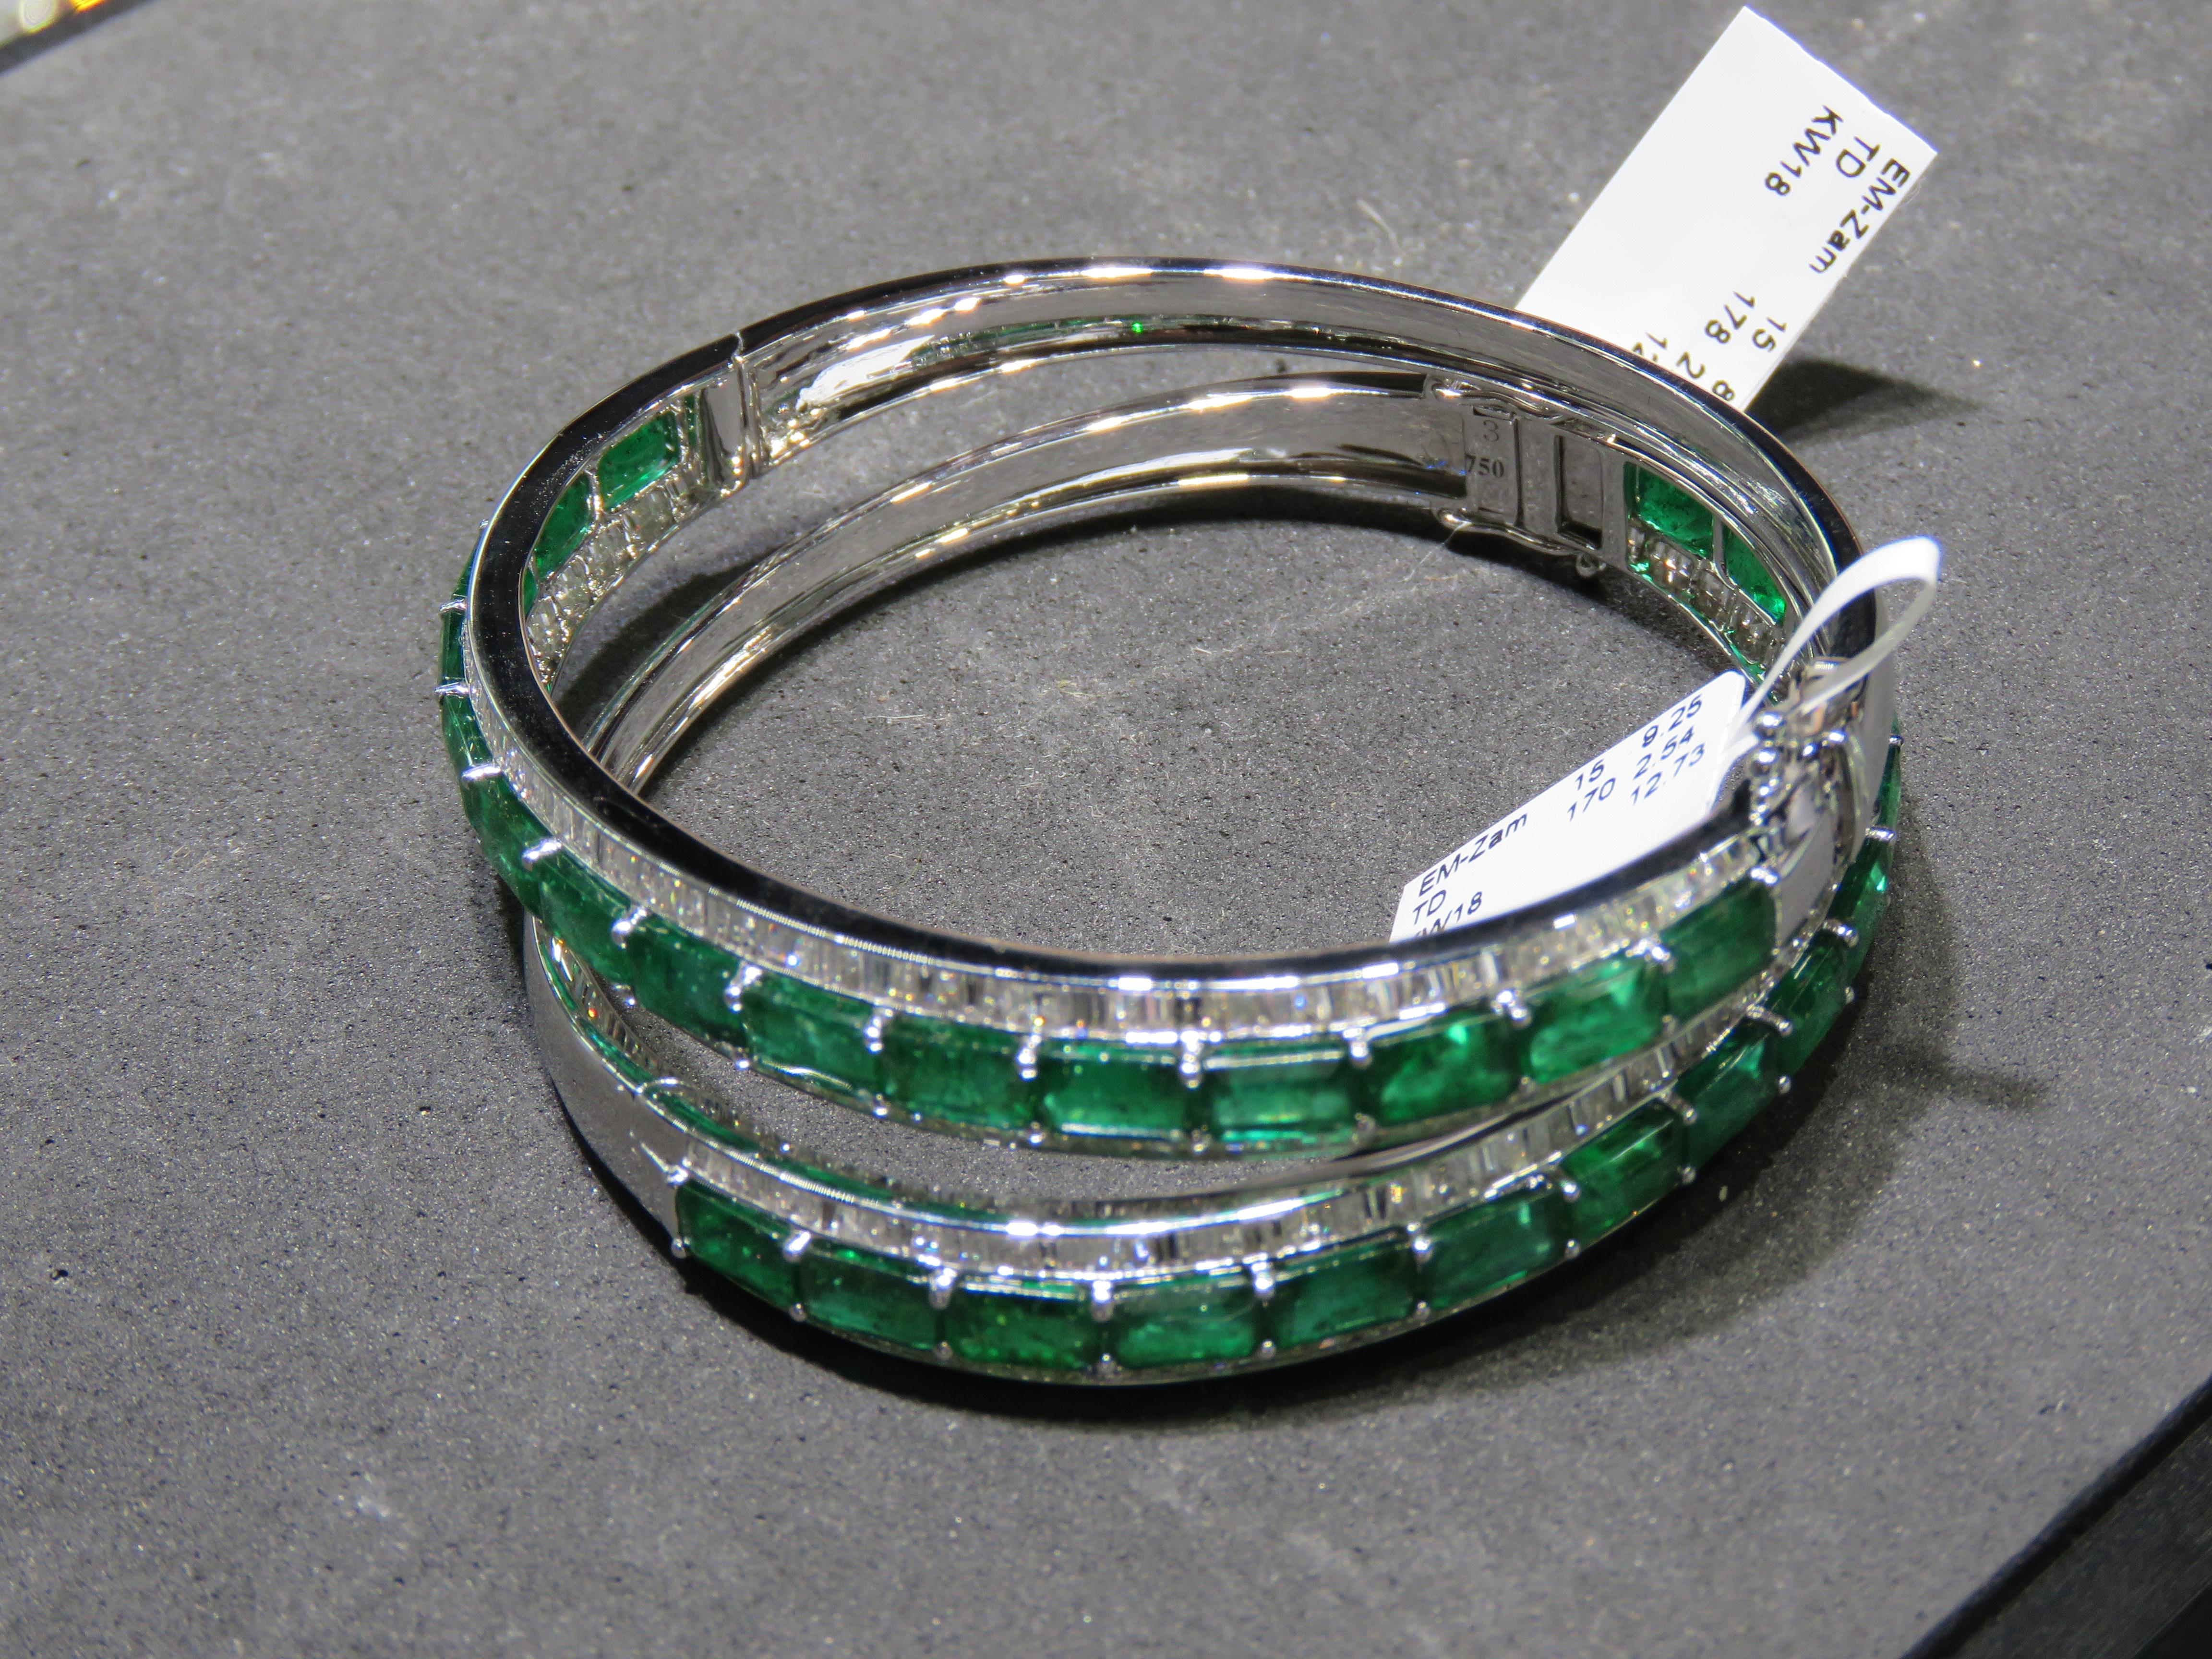 The Following Item we are offering is a Pair of Rare Magnificent Radiant 18KT Gold Large Rare Gorgeous Fancy Emerald and Diamond Bangle Cuff Bracelets. Bracelets are comprised of Beautiful Glittering Emeralds Framed with Gorgeous Glittering